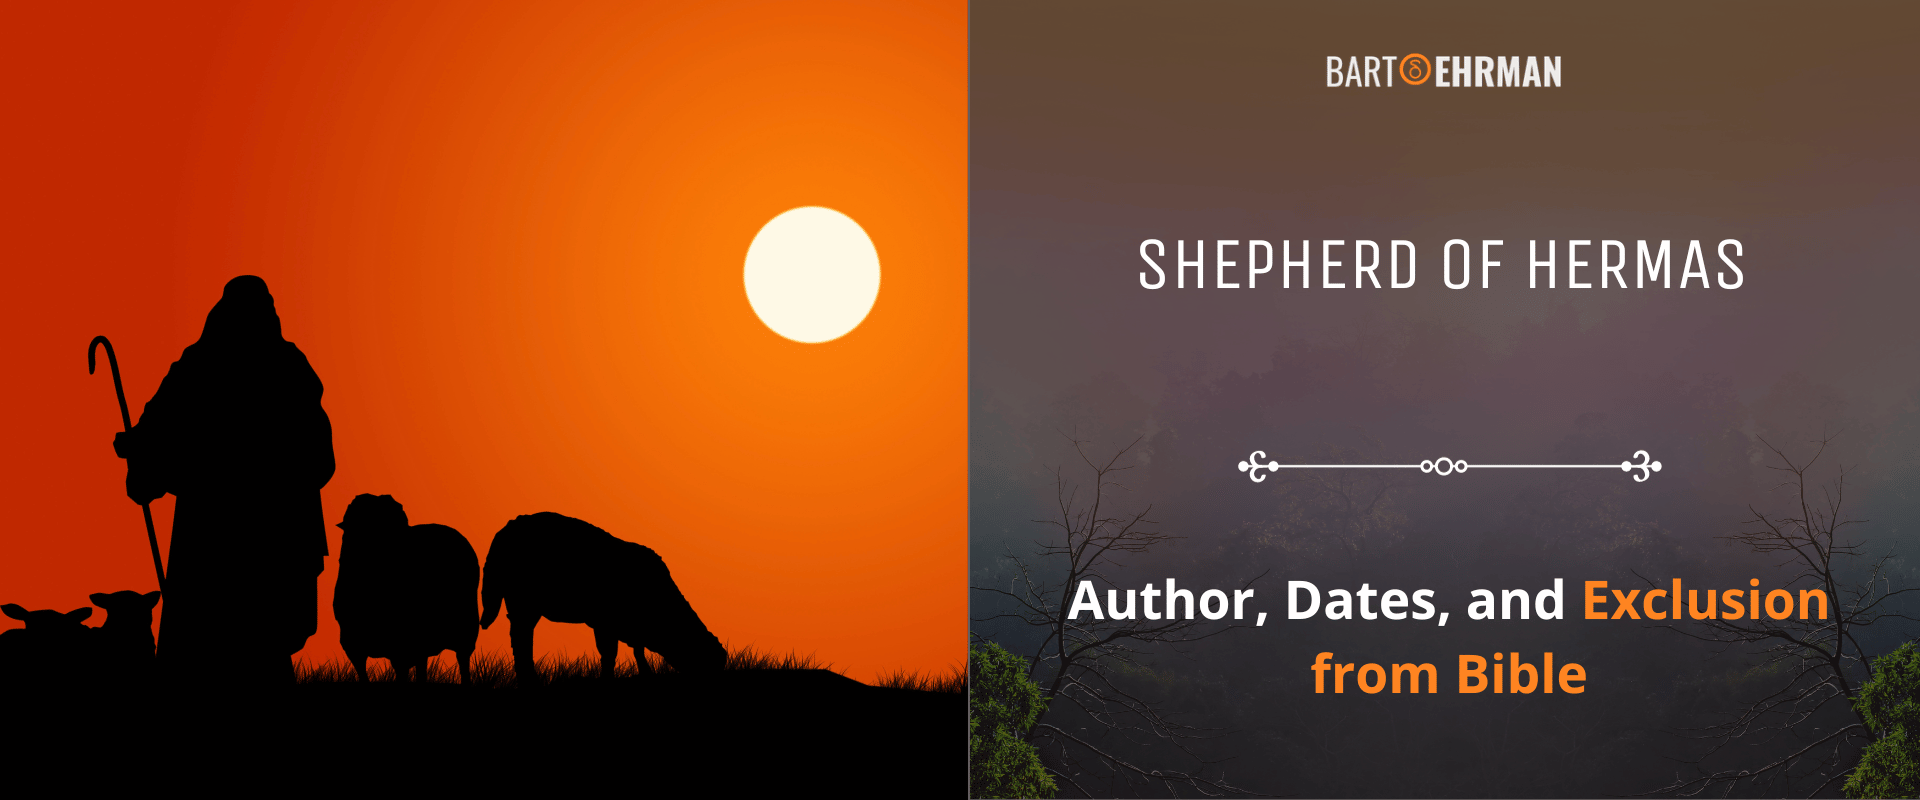 Shepherd of Hermas - Author, Dates, and Exclusion from Bible